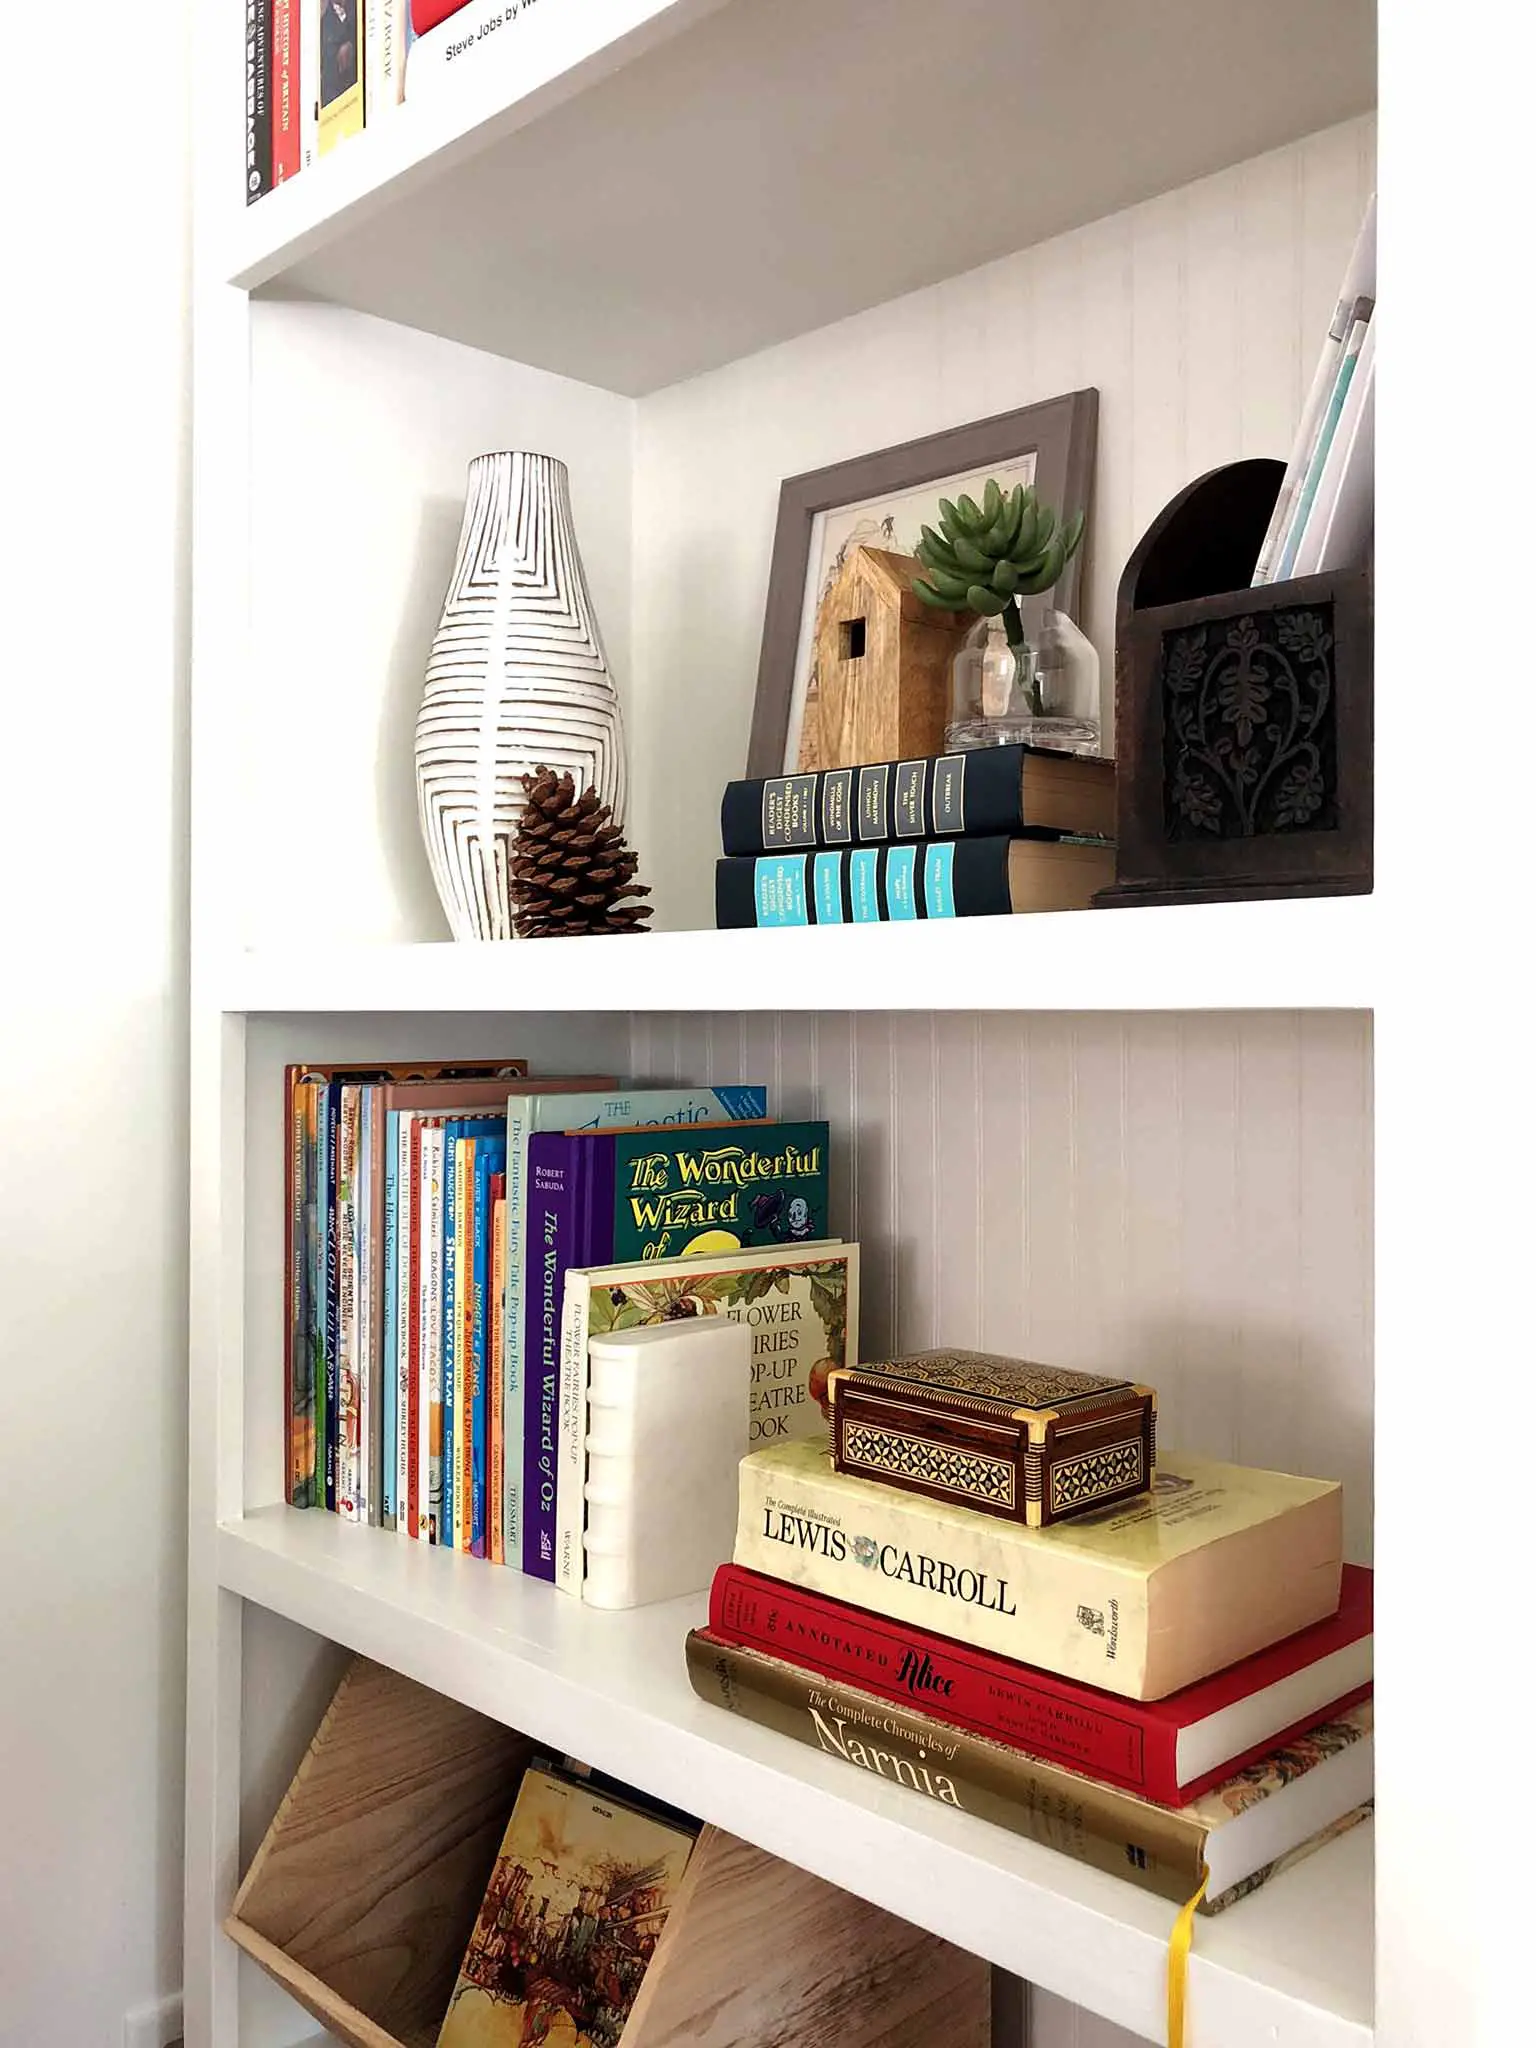 Built-in book shelf - How to Declutter, Organize and Style Kids' Books - That Homebird Life Blog